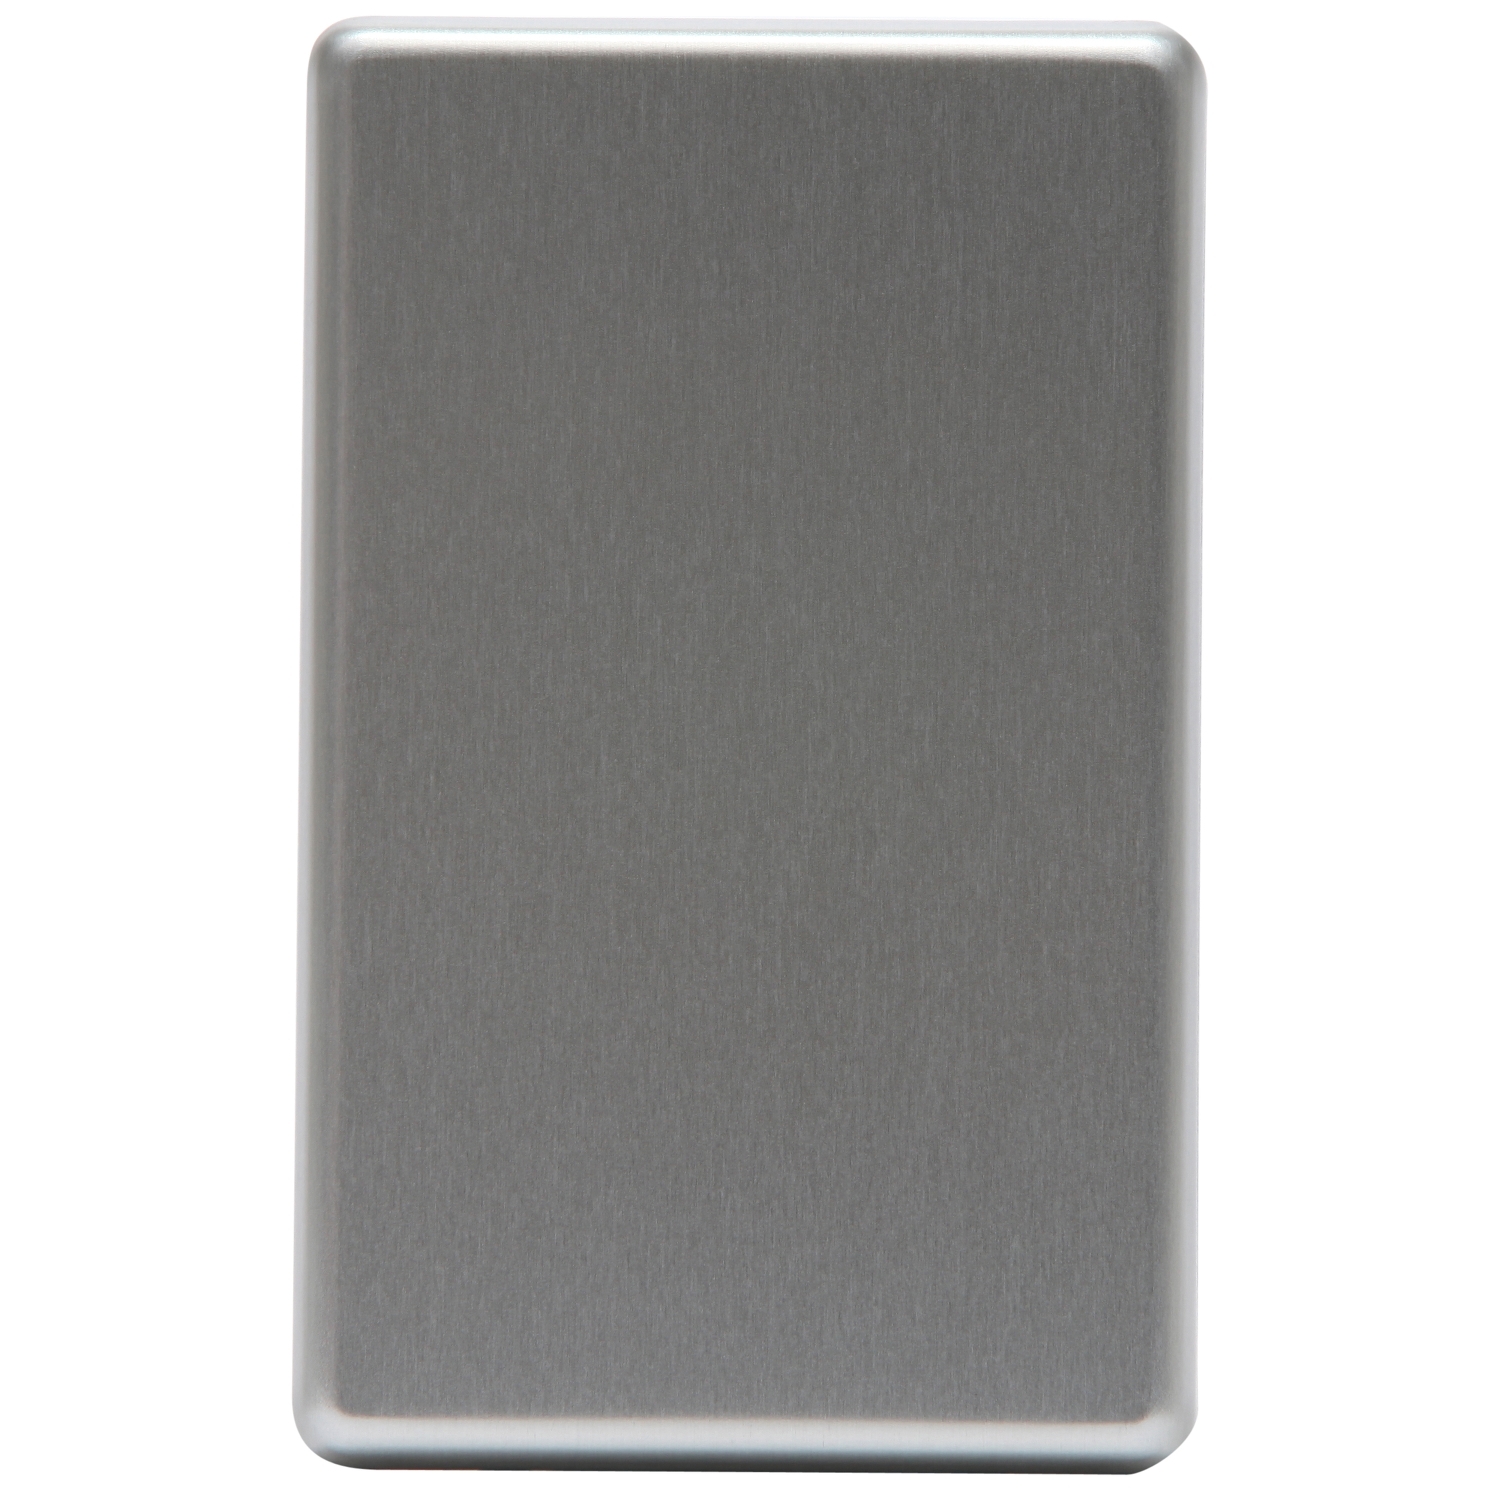 Full-Face Blank Switch Cover Plate; Metal, Brushed Bronze